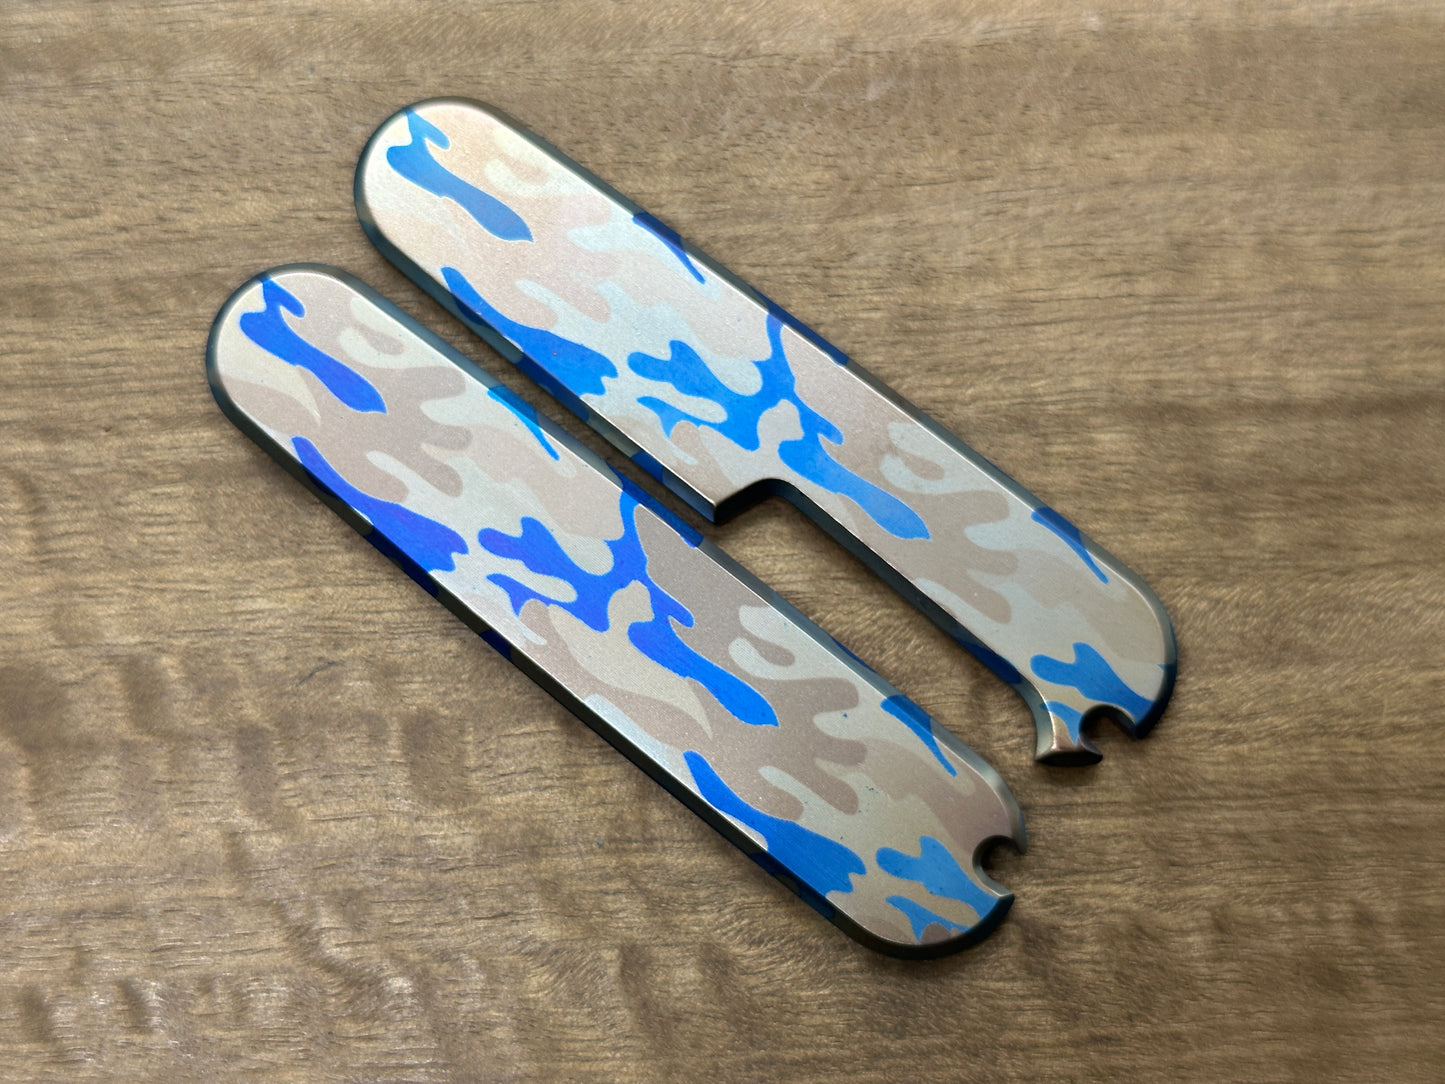 Flamed CAMO heat ano engraved 91mm Titanium Scales for Swiss Army SAK